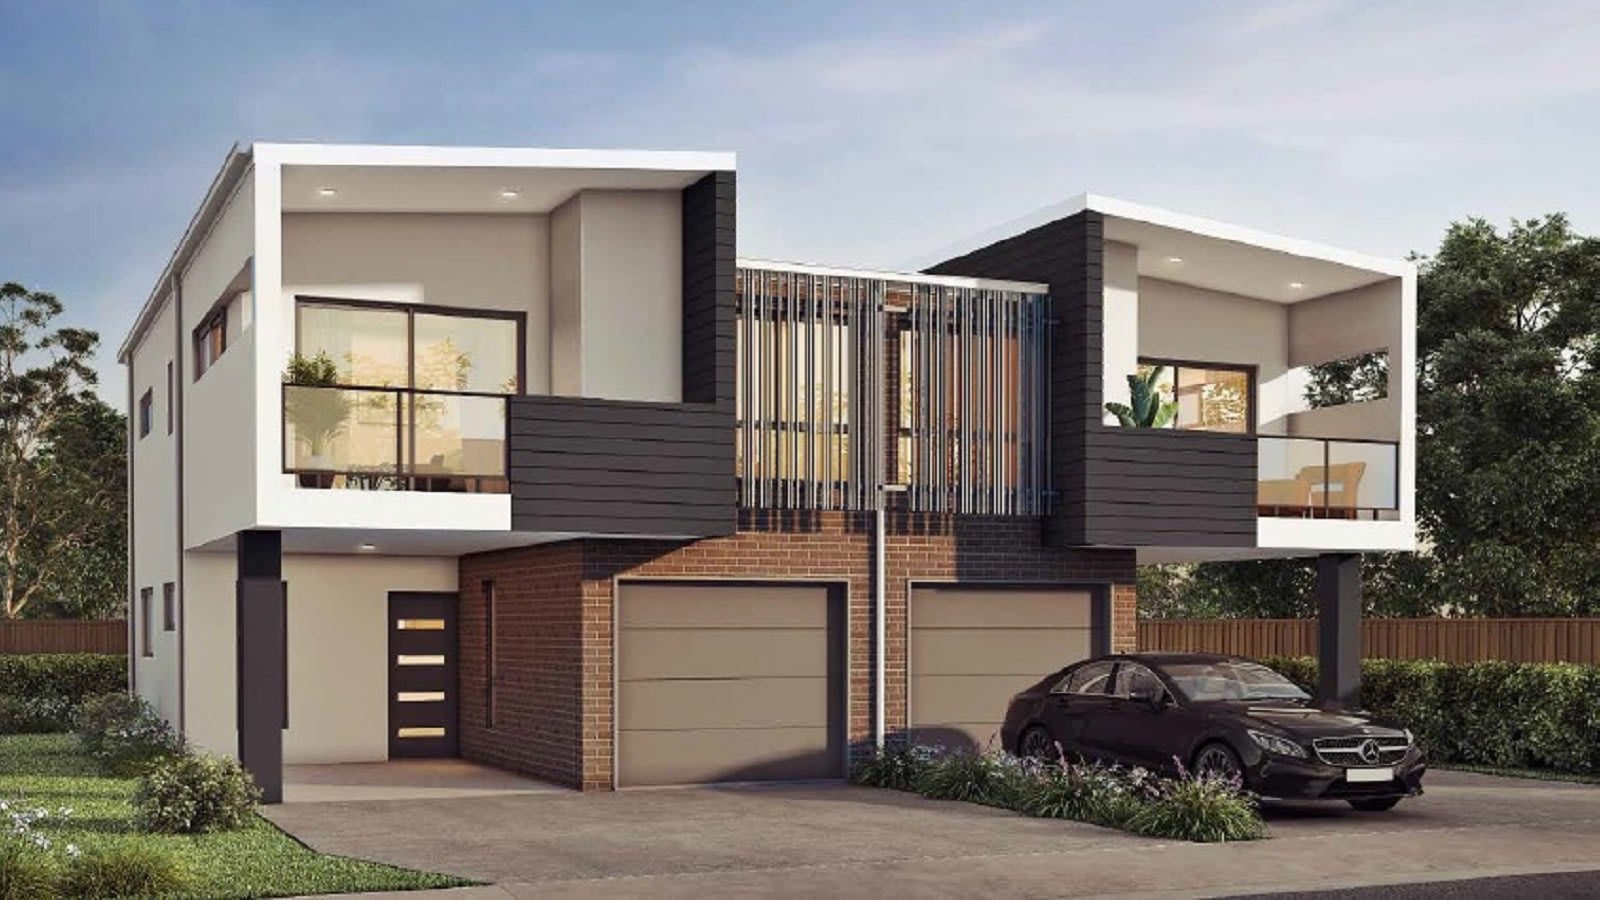 May 2021: Four affordable Brisbane family townhouses for under $585,000